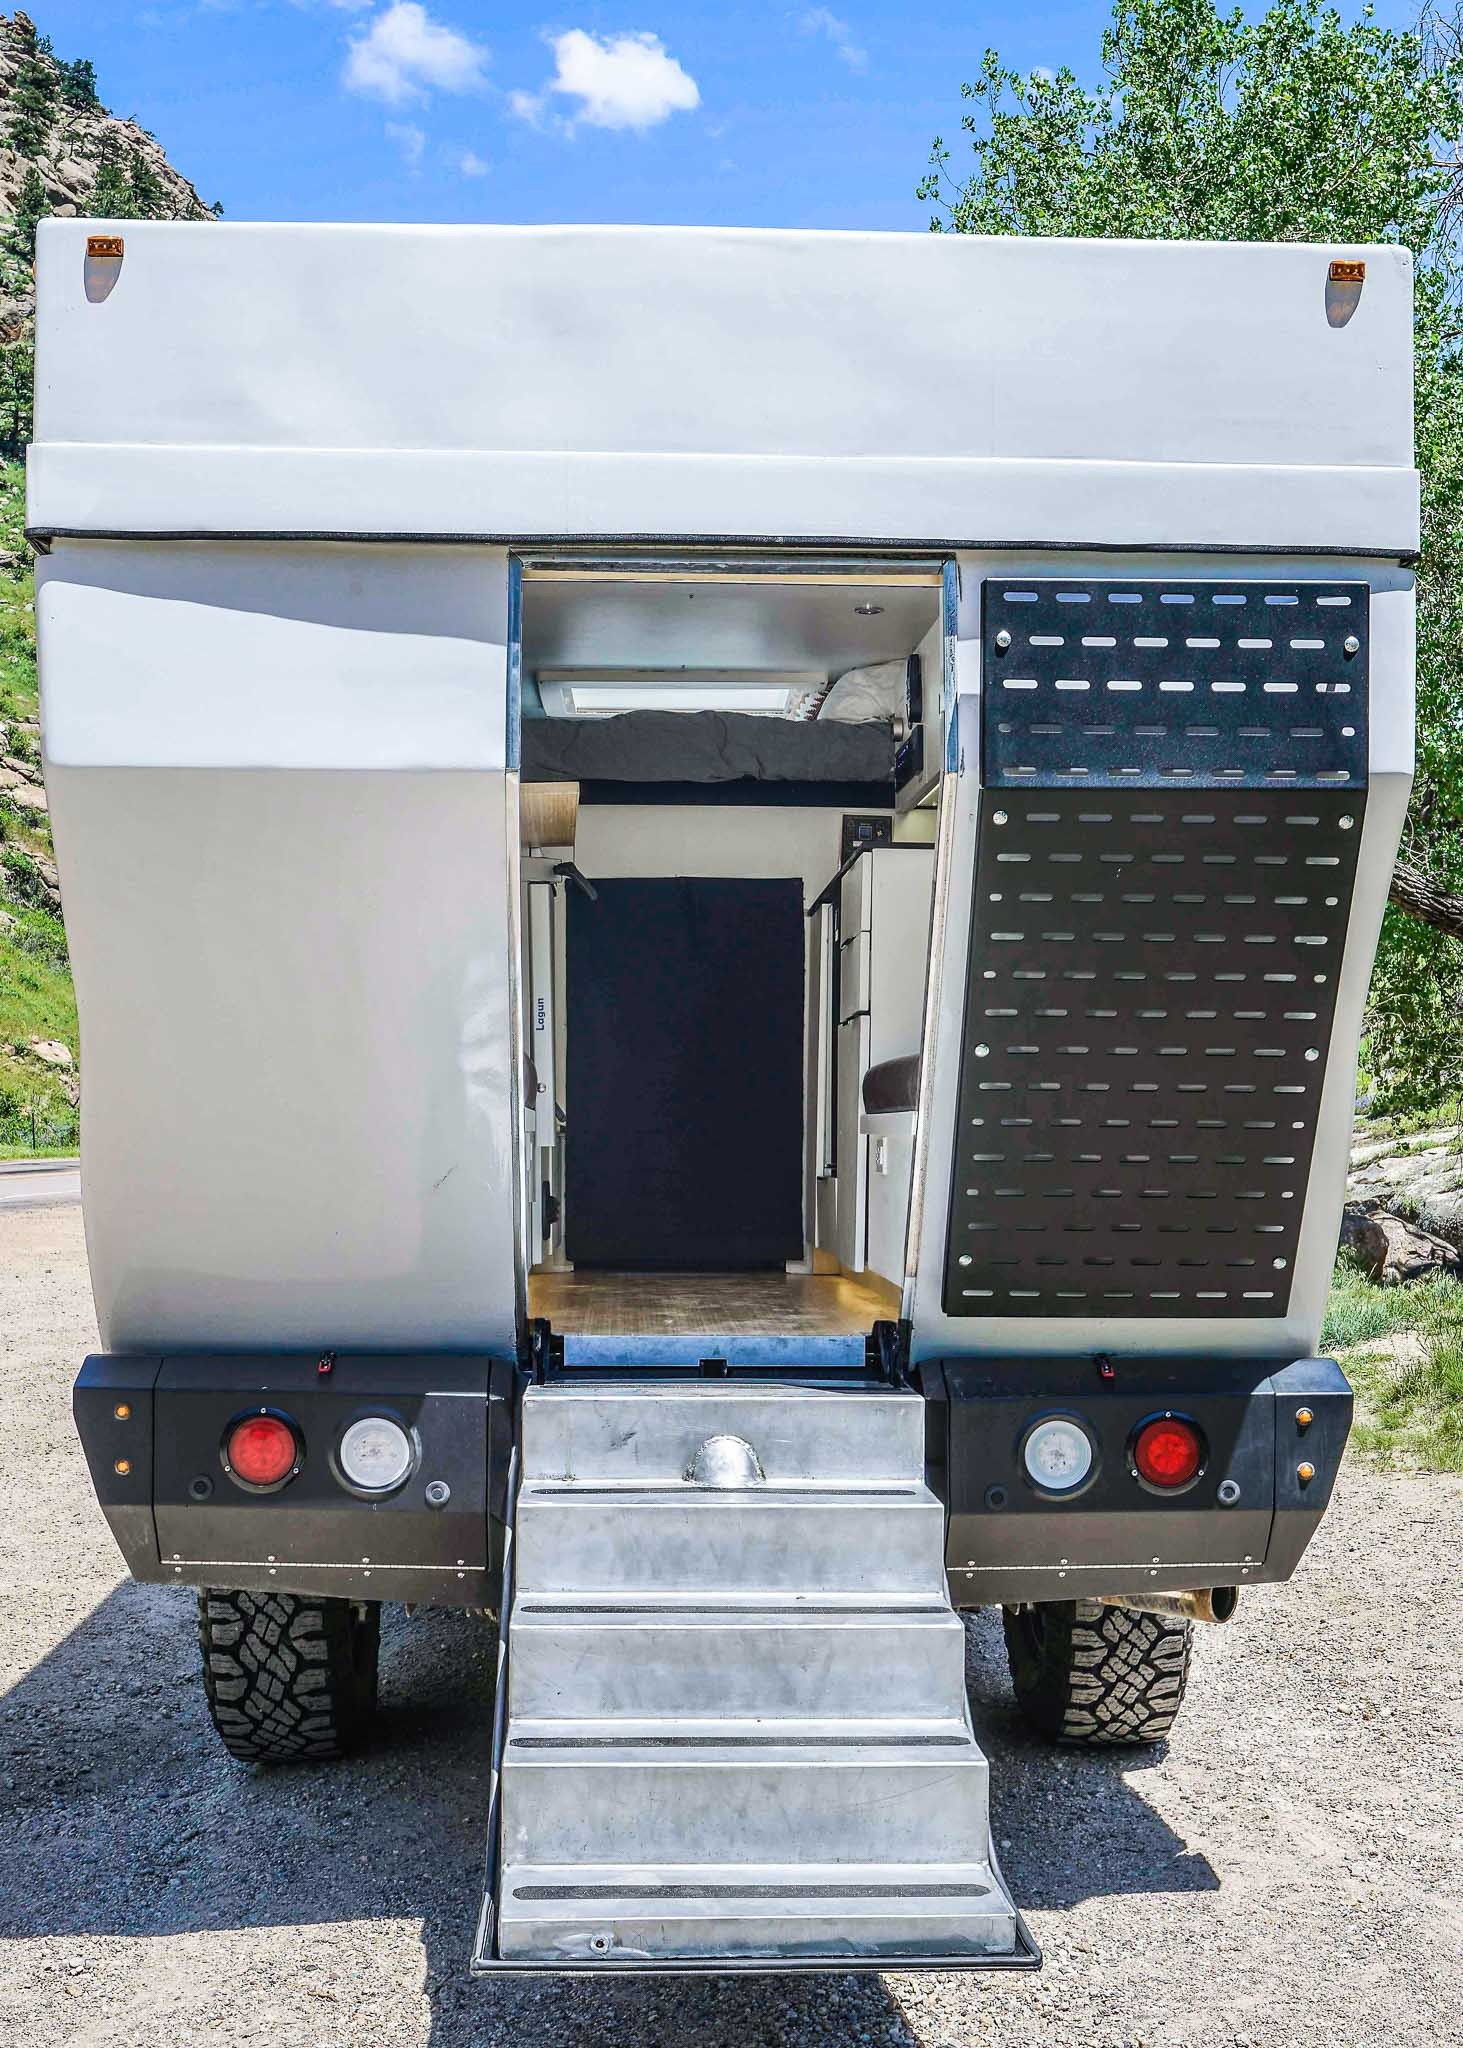 The Rossmӧnster Overland Baja Truck Camper Replaces the Pickup Bed